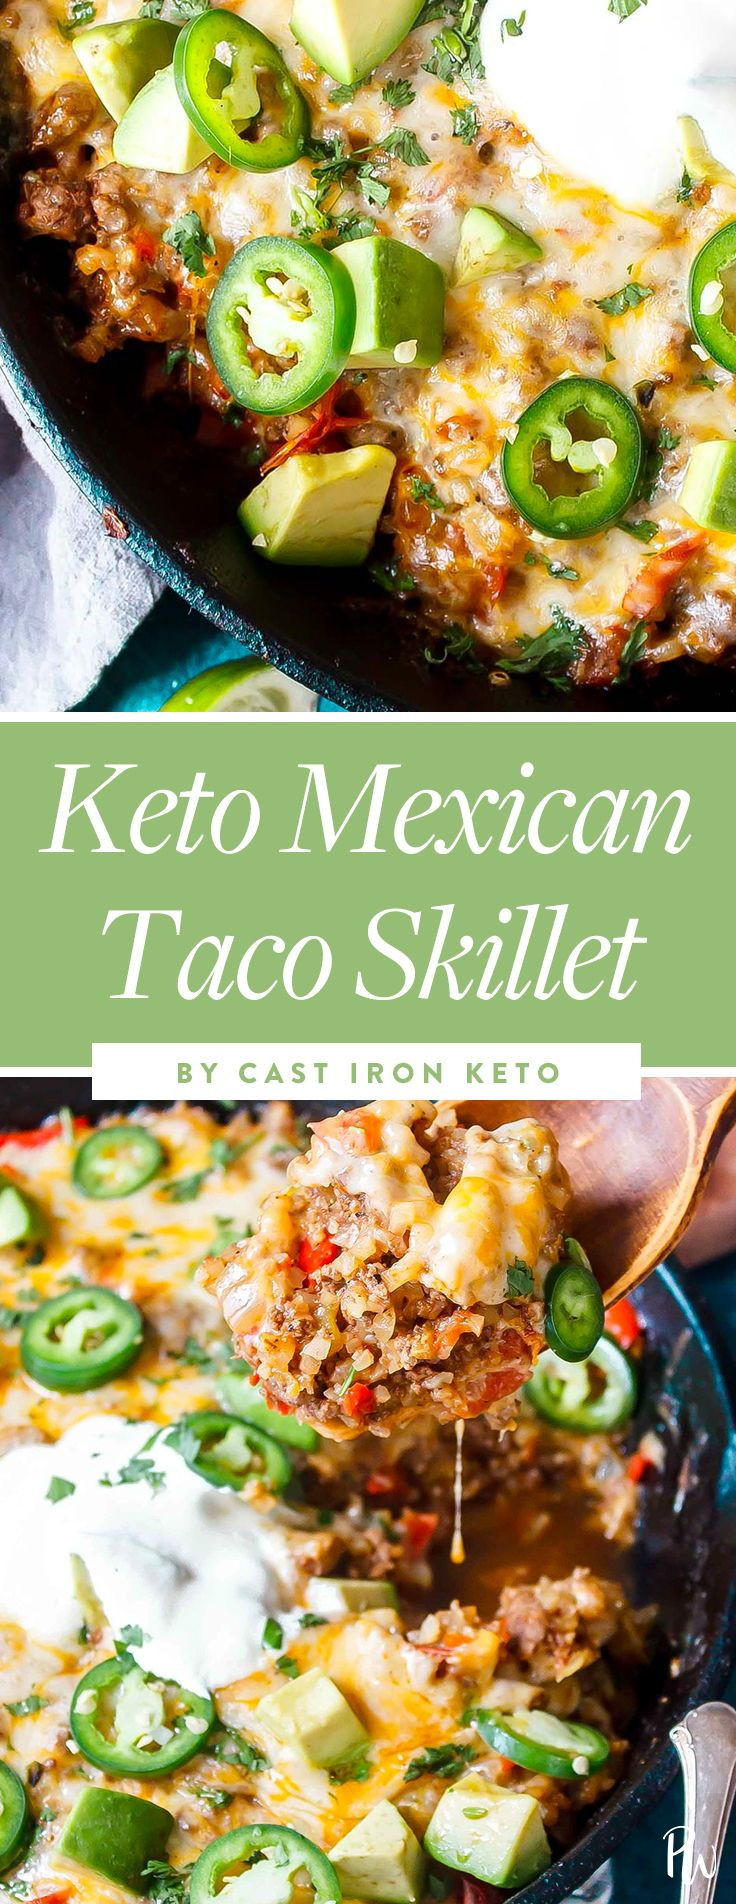 Mexican Keto Recipes Ground Beef
 27 Keto Ground Beef Recipes for When You’re Sick of